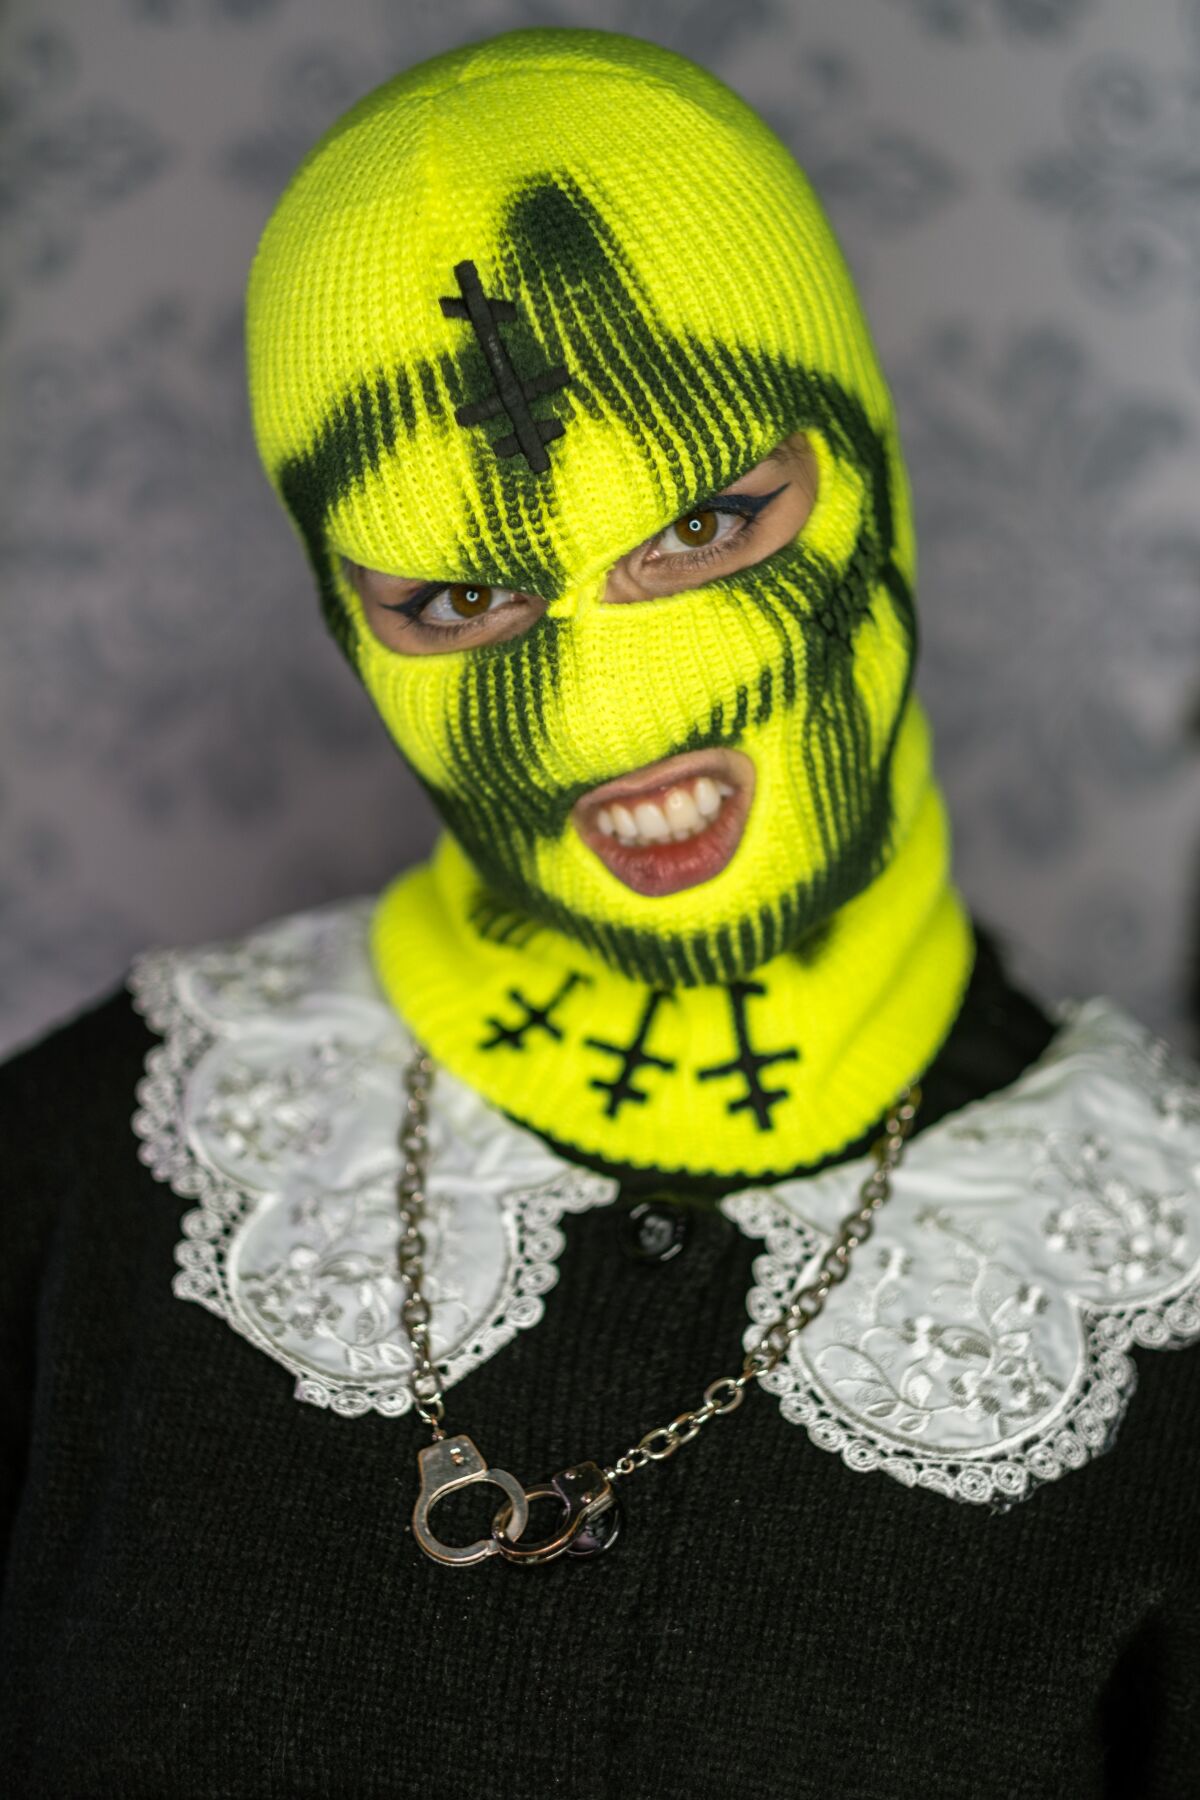 A woman sneers through a neon-colored balaclava mask.